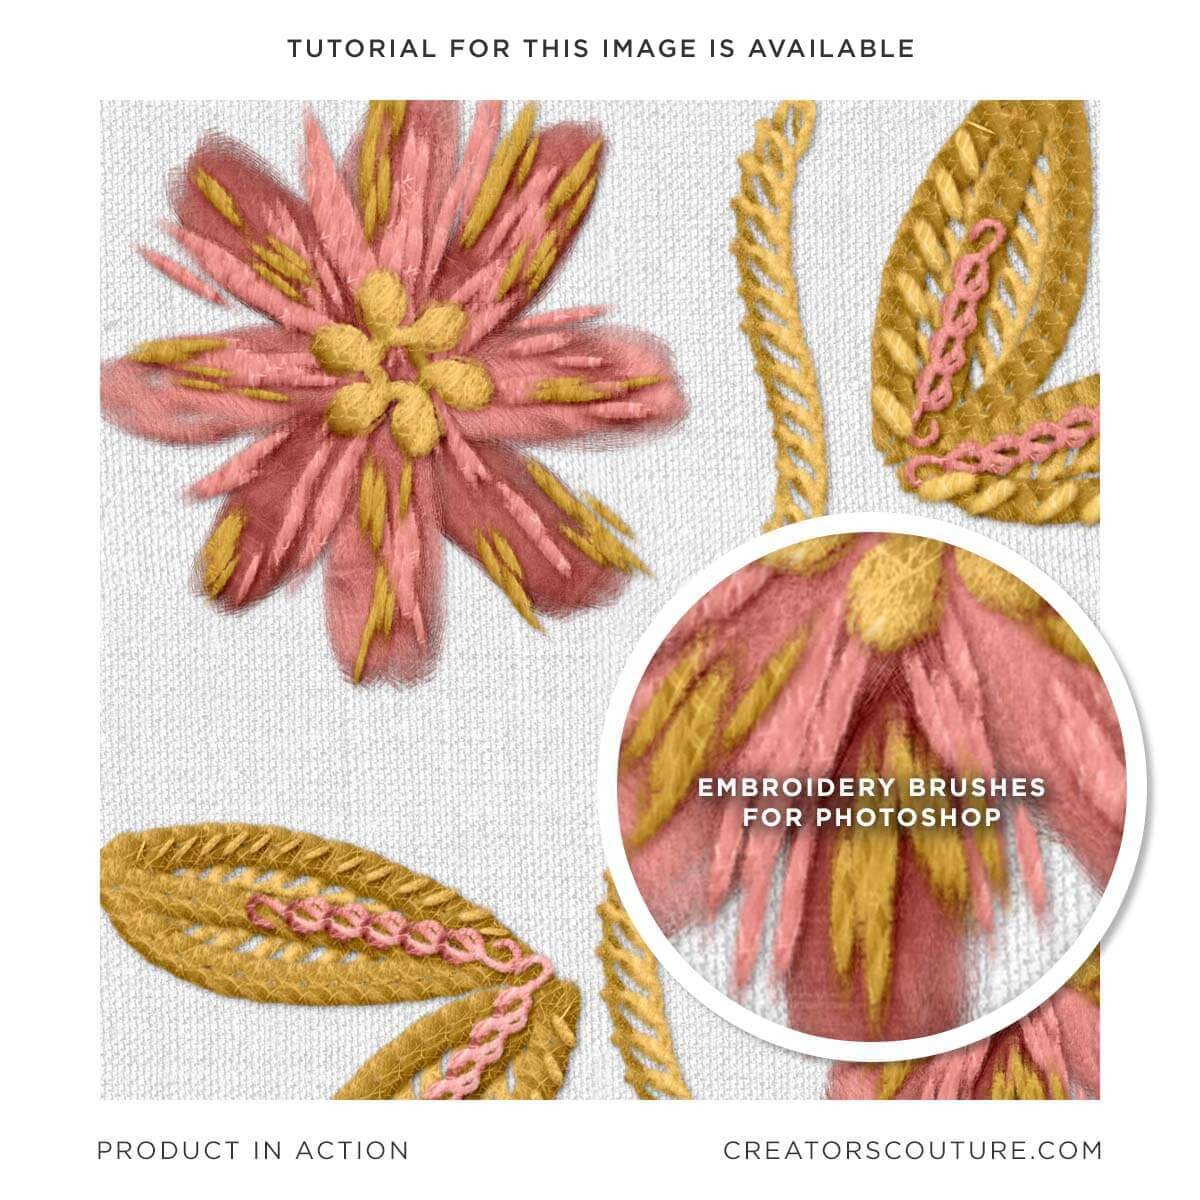 Thread art style illustration created in Photoshop of motif, leaves, and vine. Close-up showing a dimensional realistic effect with Photoshop brushes that look like real threads. Tutorial preview